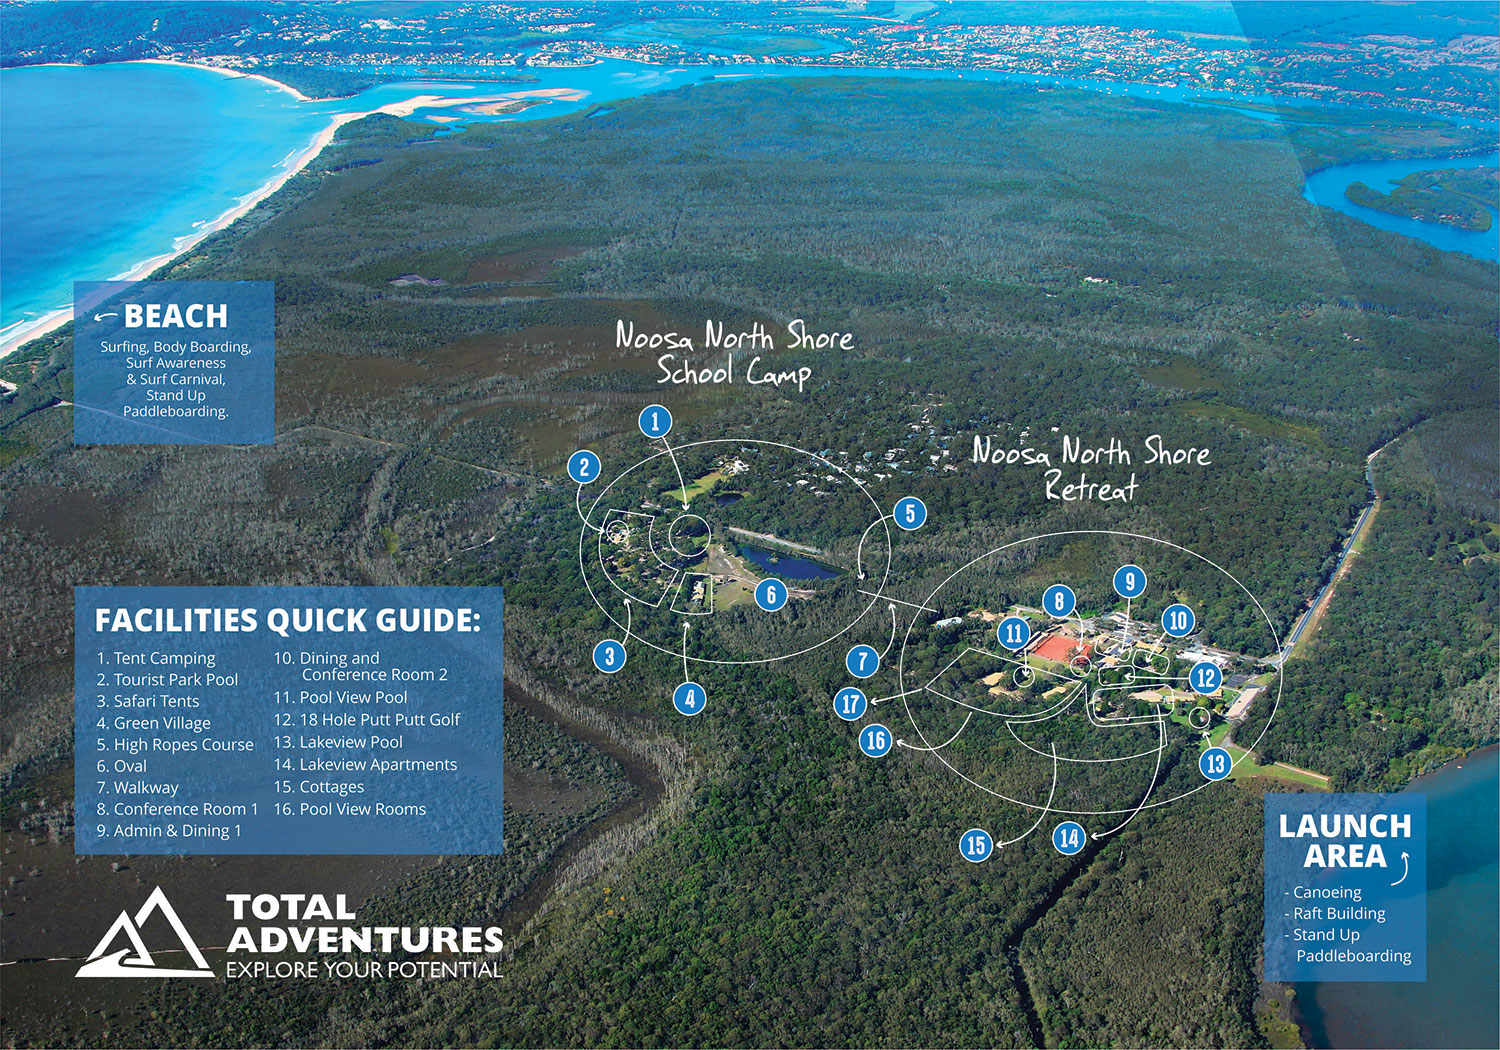 Total-adventures-facility-guide-map.jpg